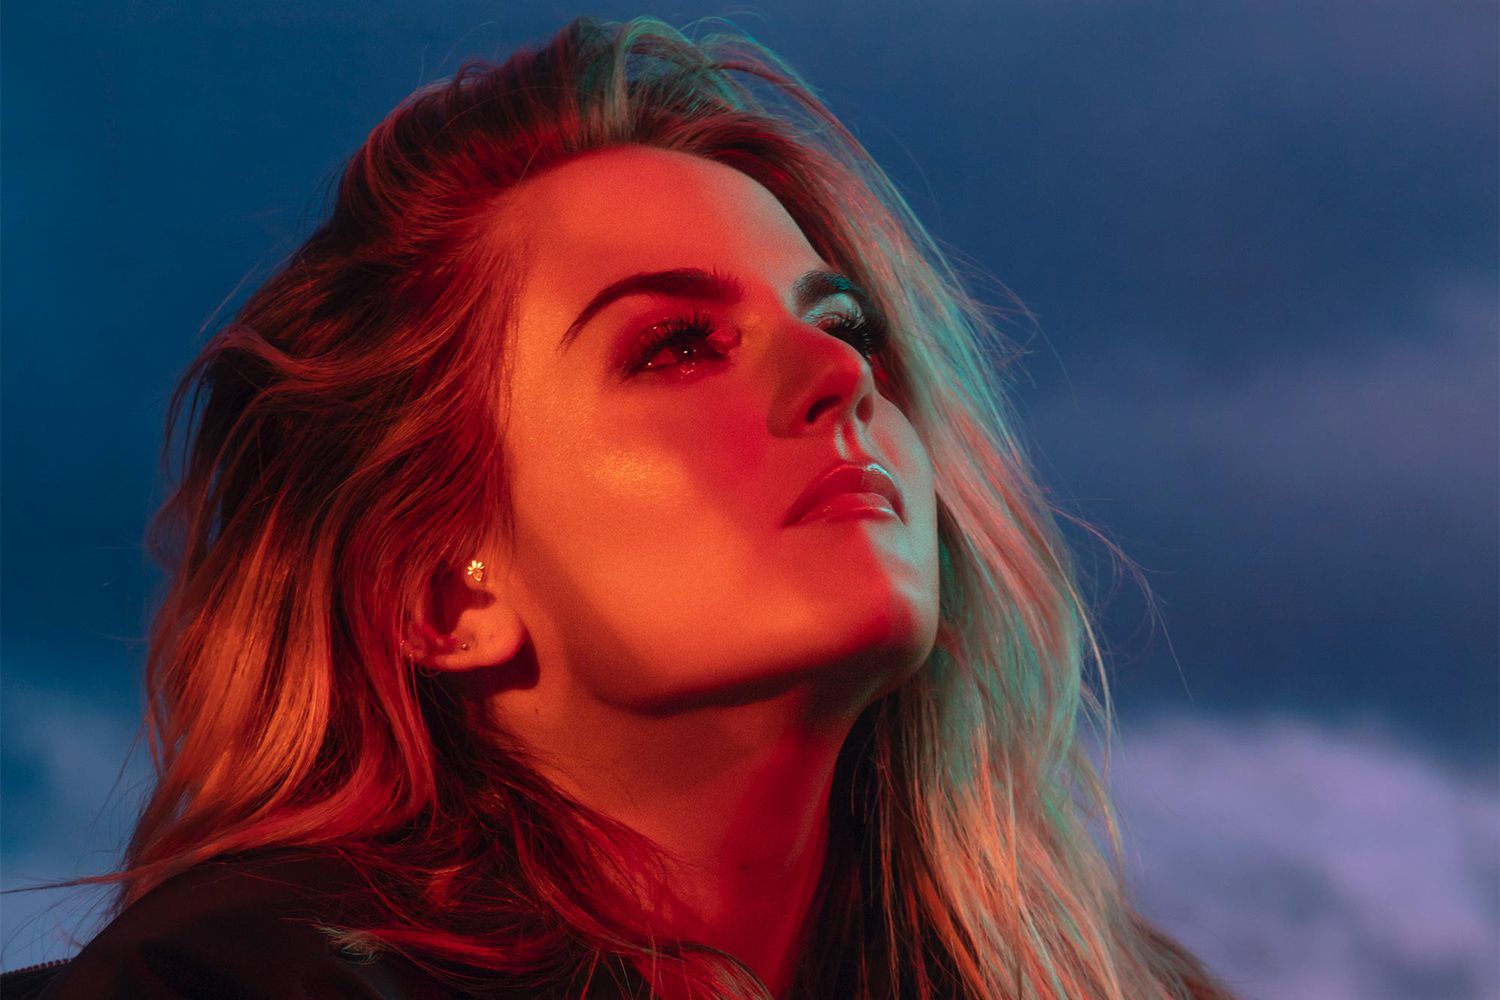 Jojo Opens Up About Releasing Album Good To Know During Covid 19